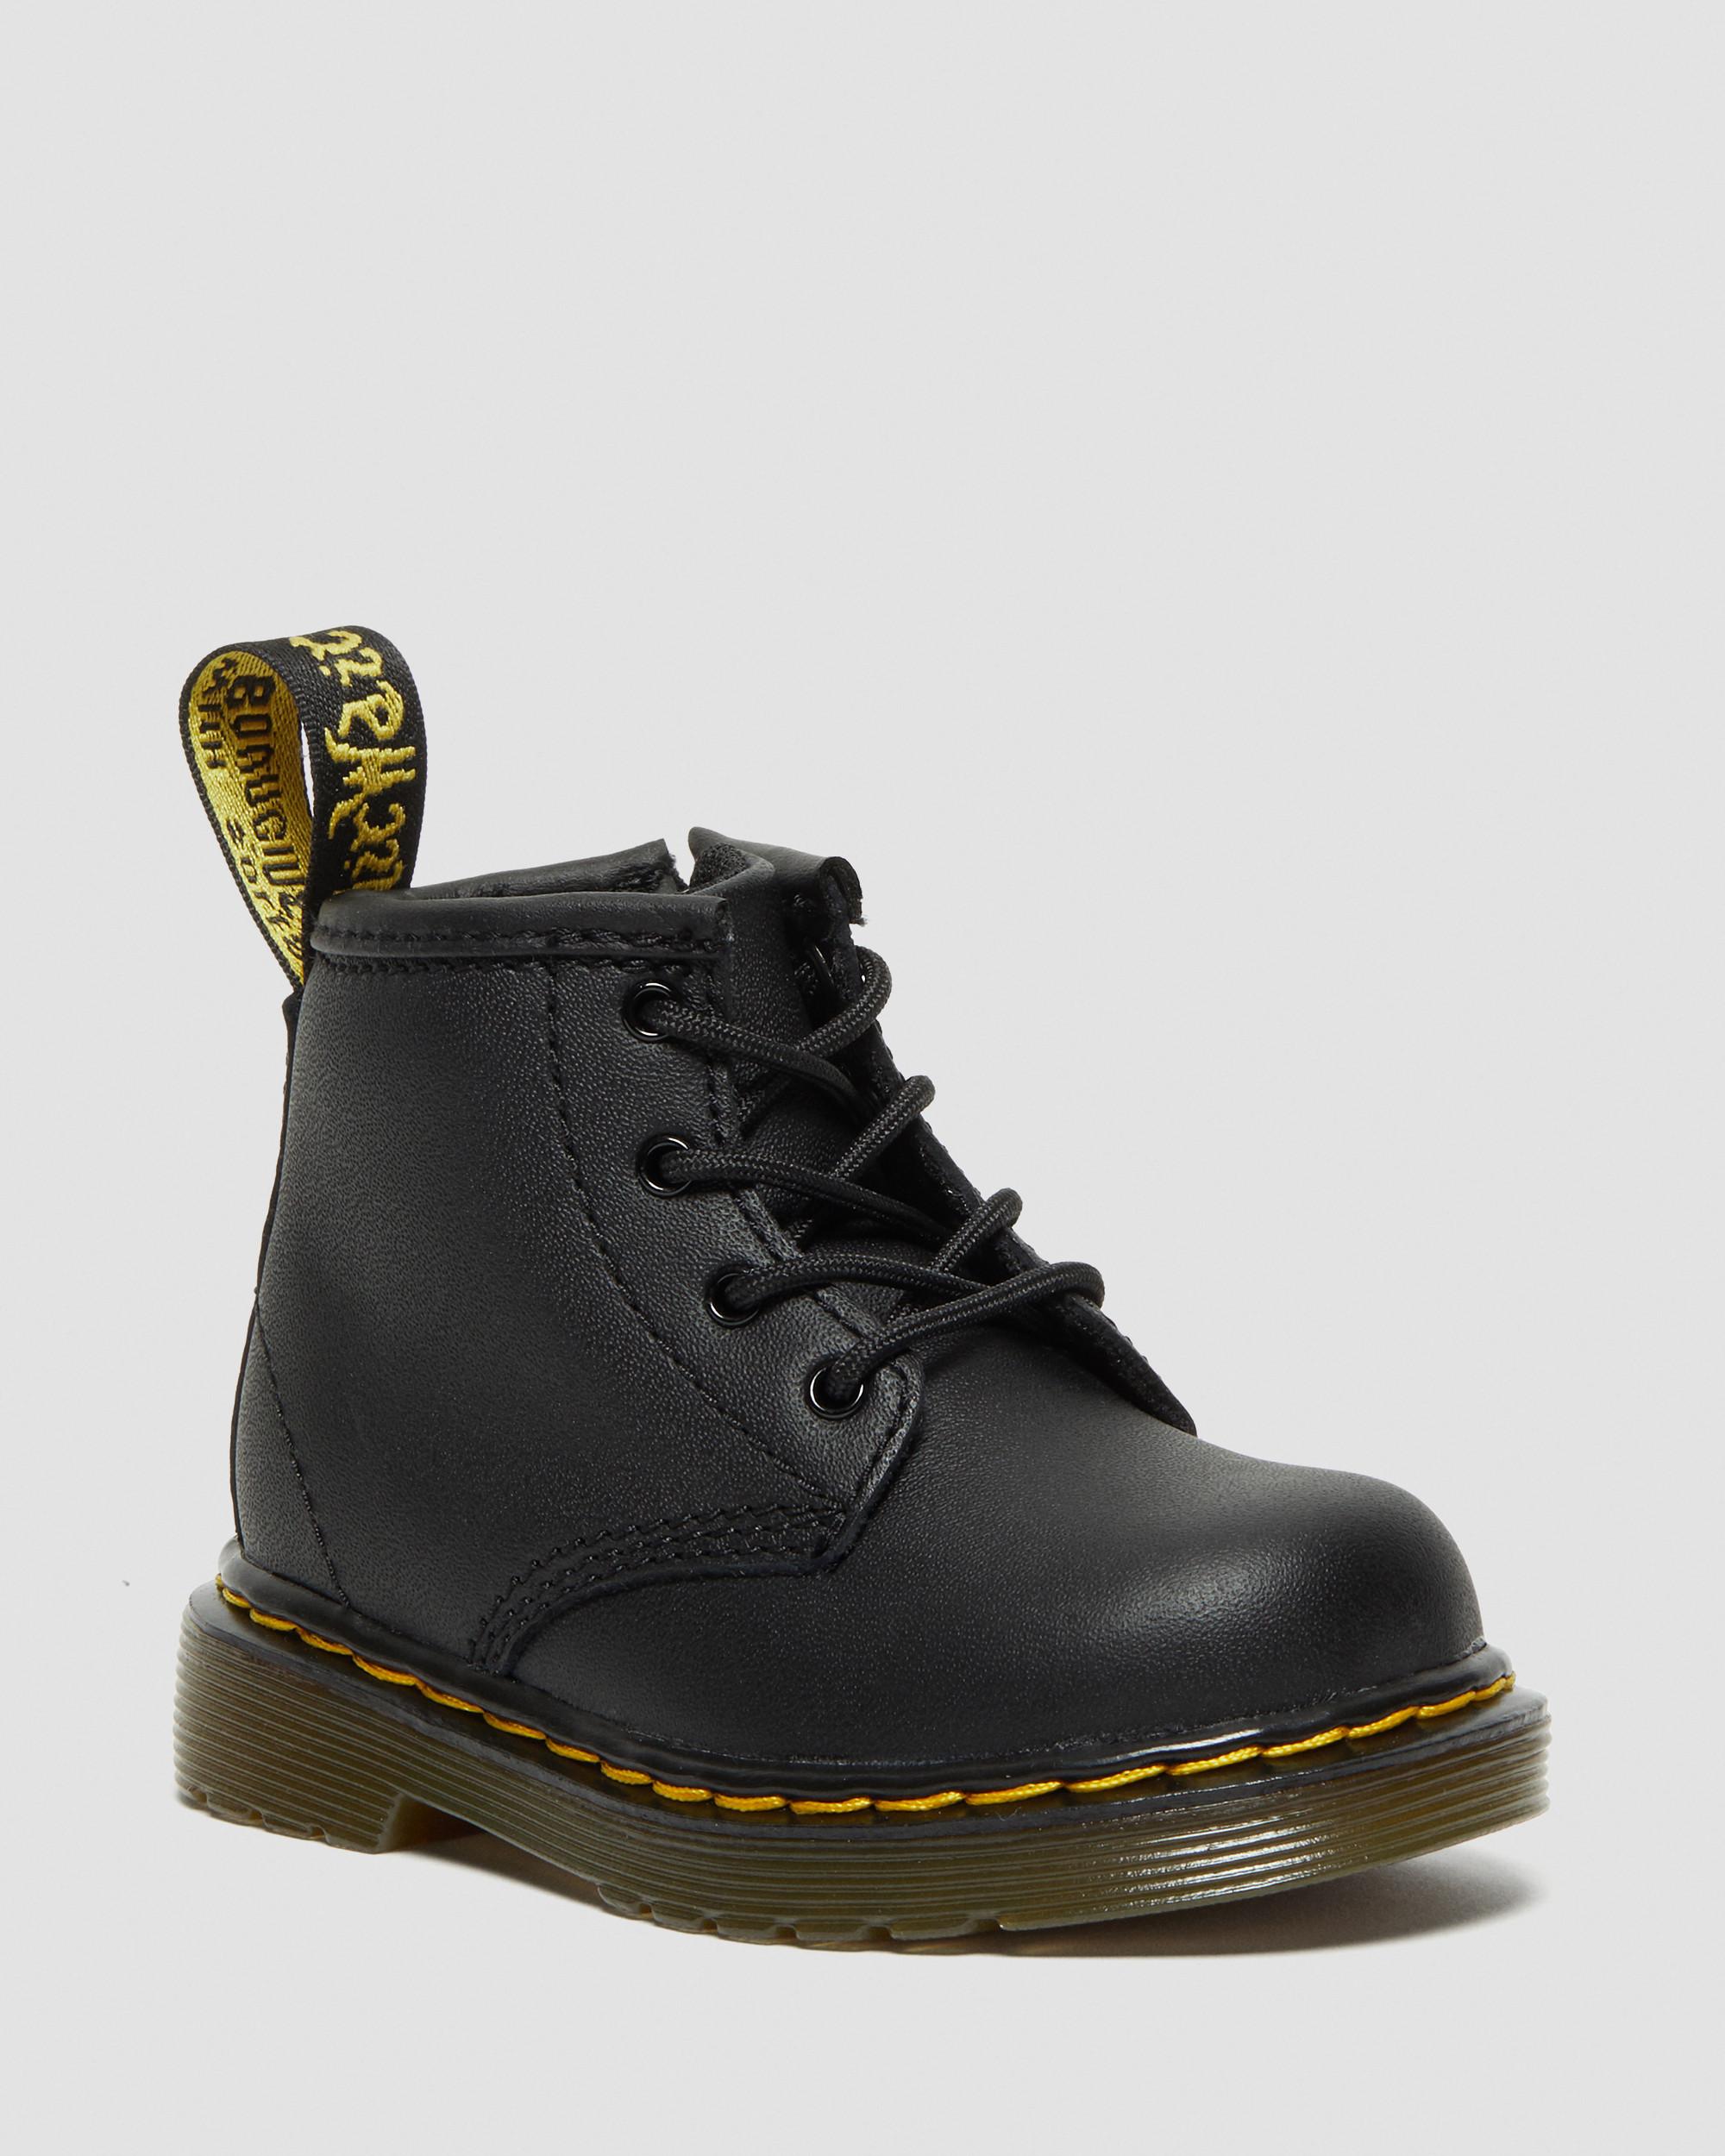 INFANT 1460 SOFTY T LEATHER LACE UP BOOTS | Dr. Martens Official